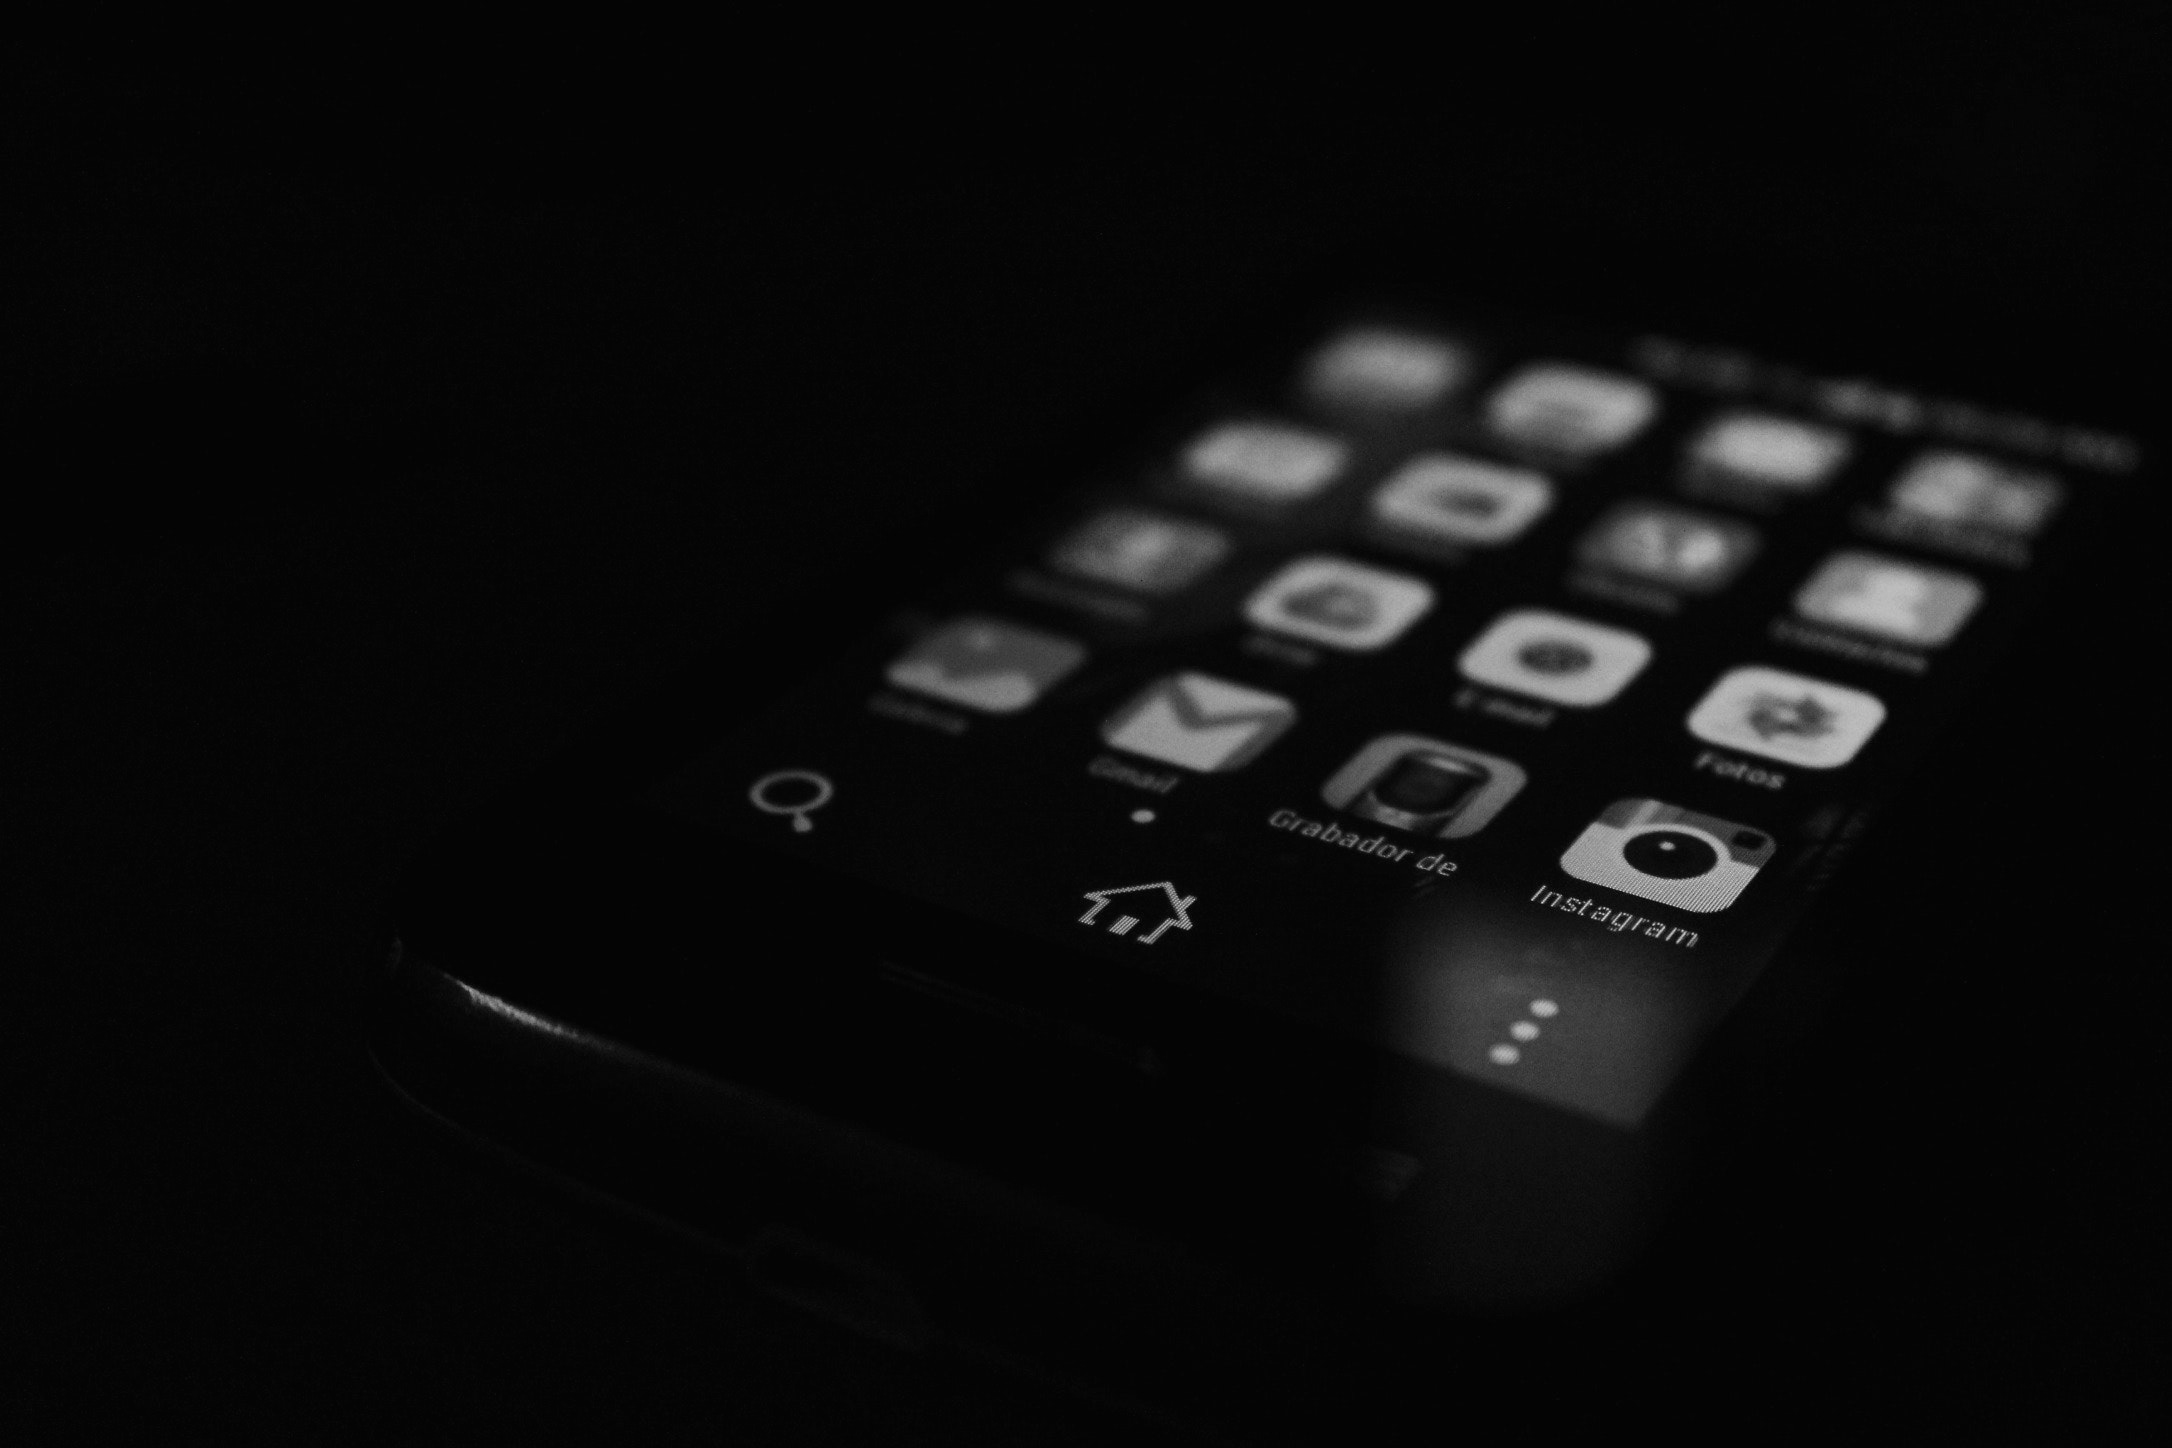 A black and white image of a mobile phone screen showing apps.